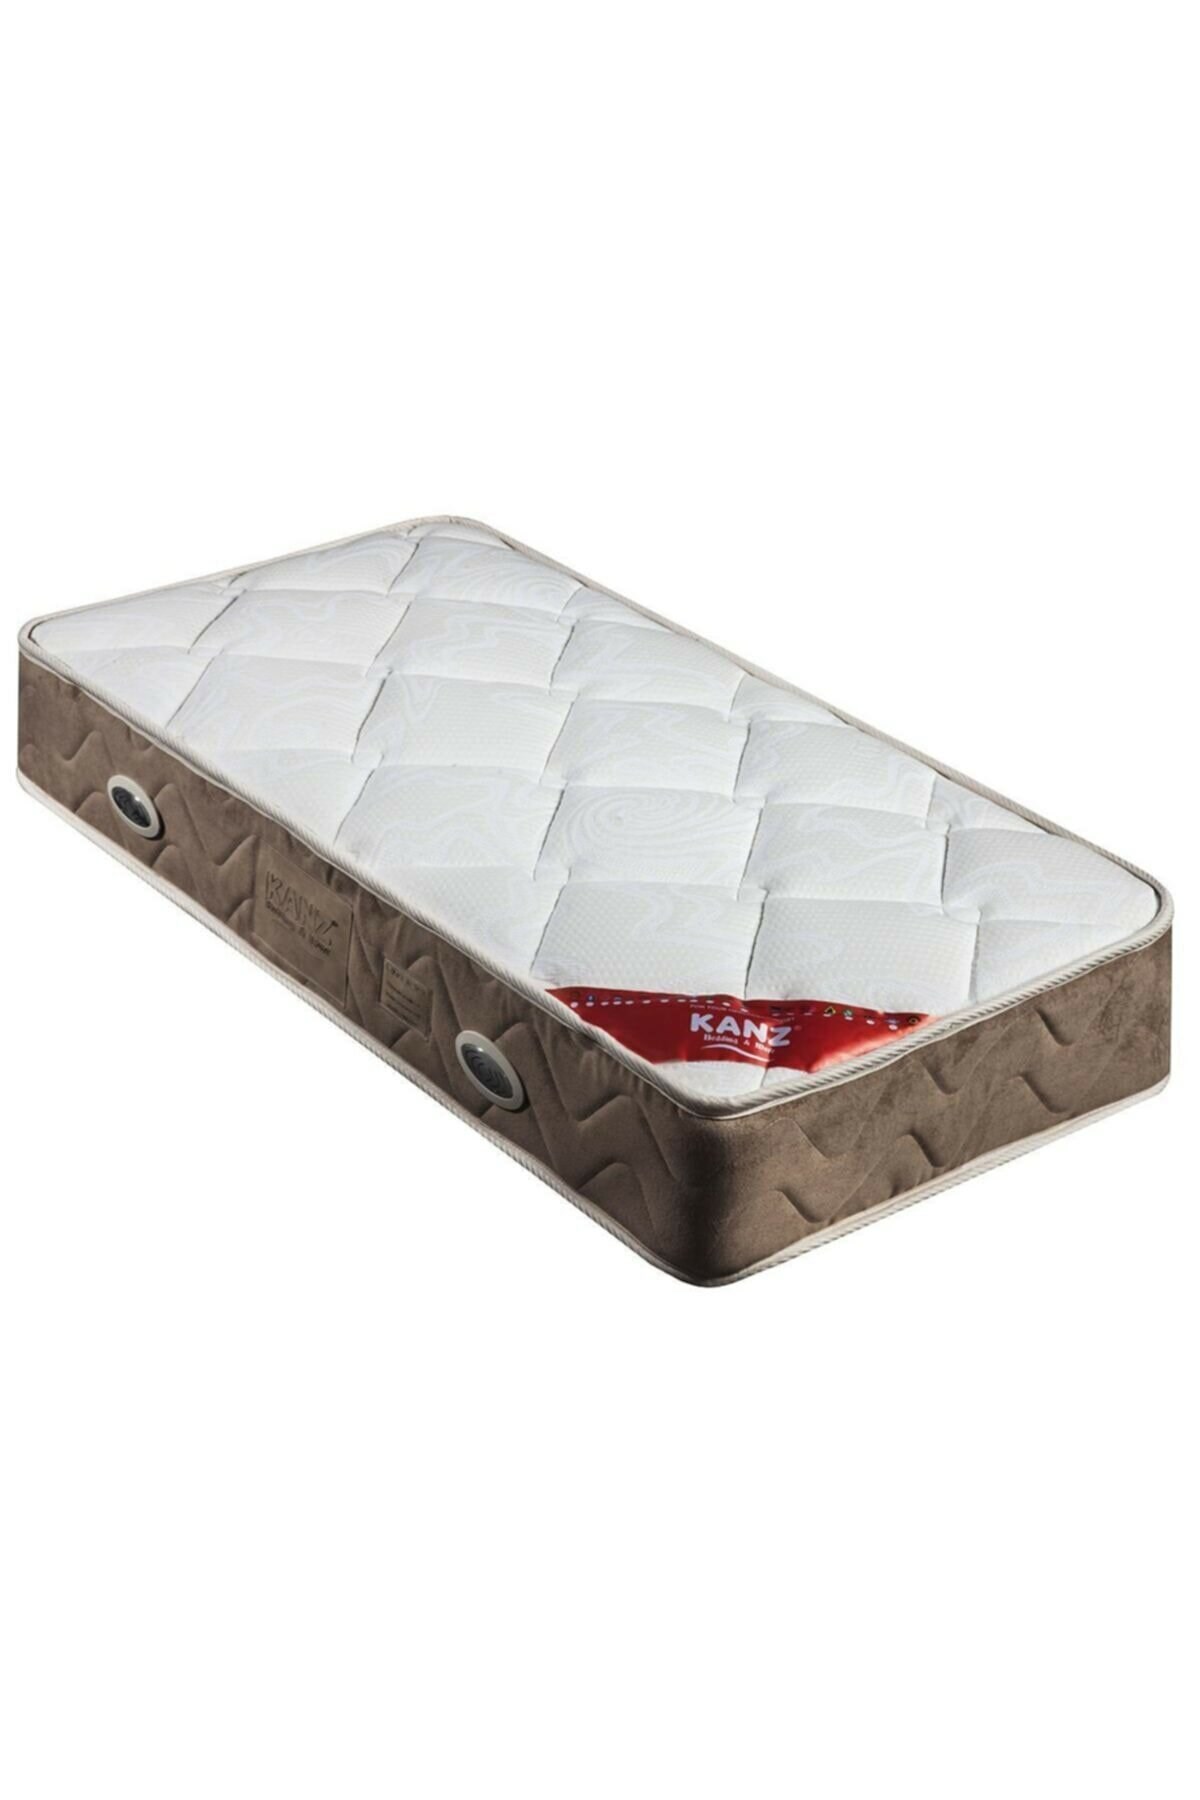 Kanz Babybed Fitbed Fit Yatak 70x130 cm